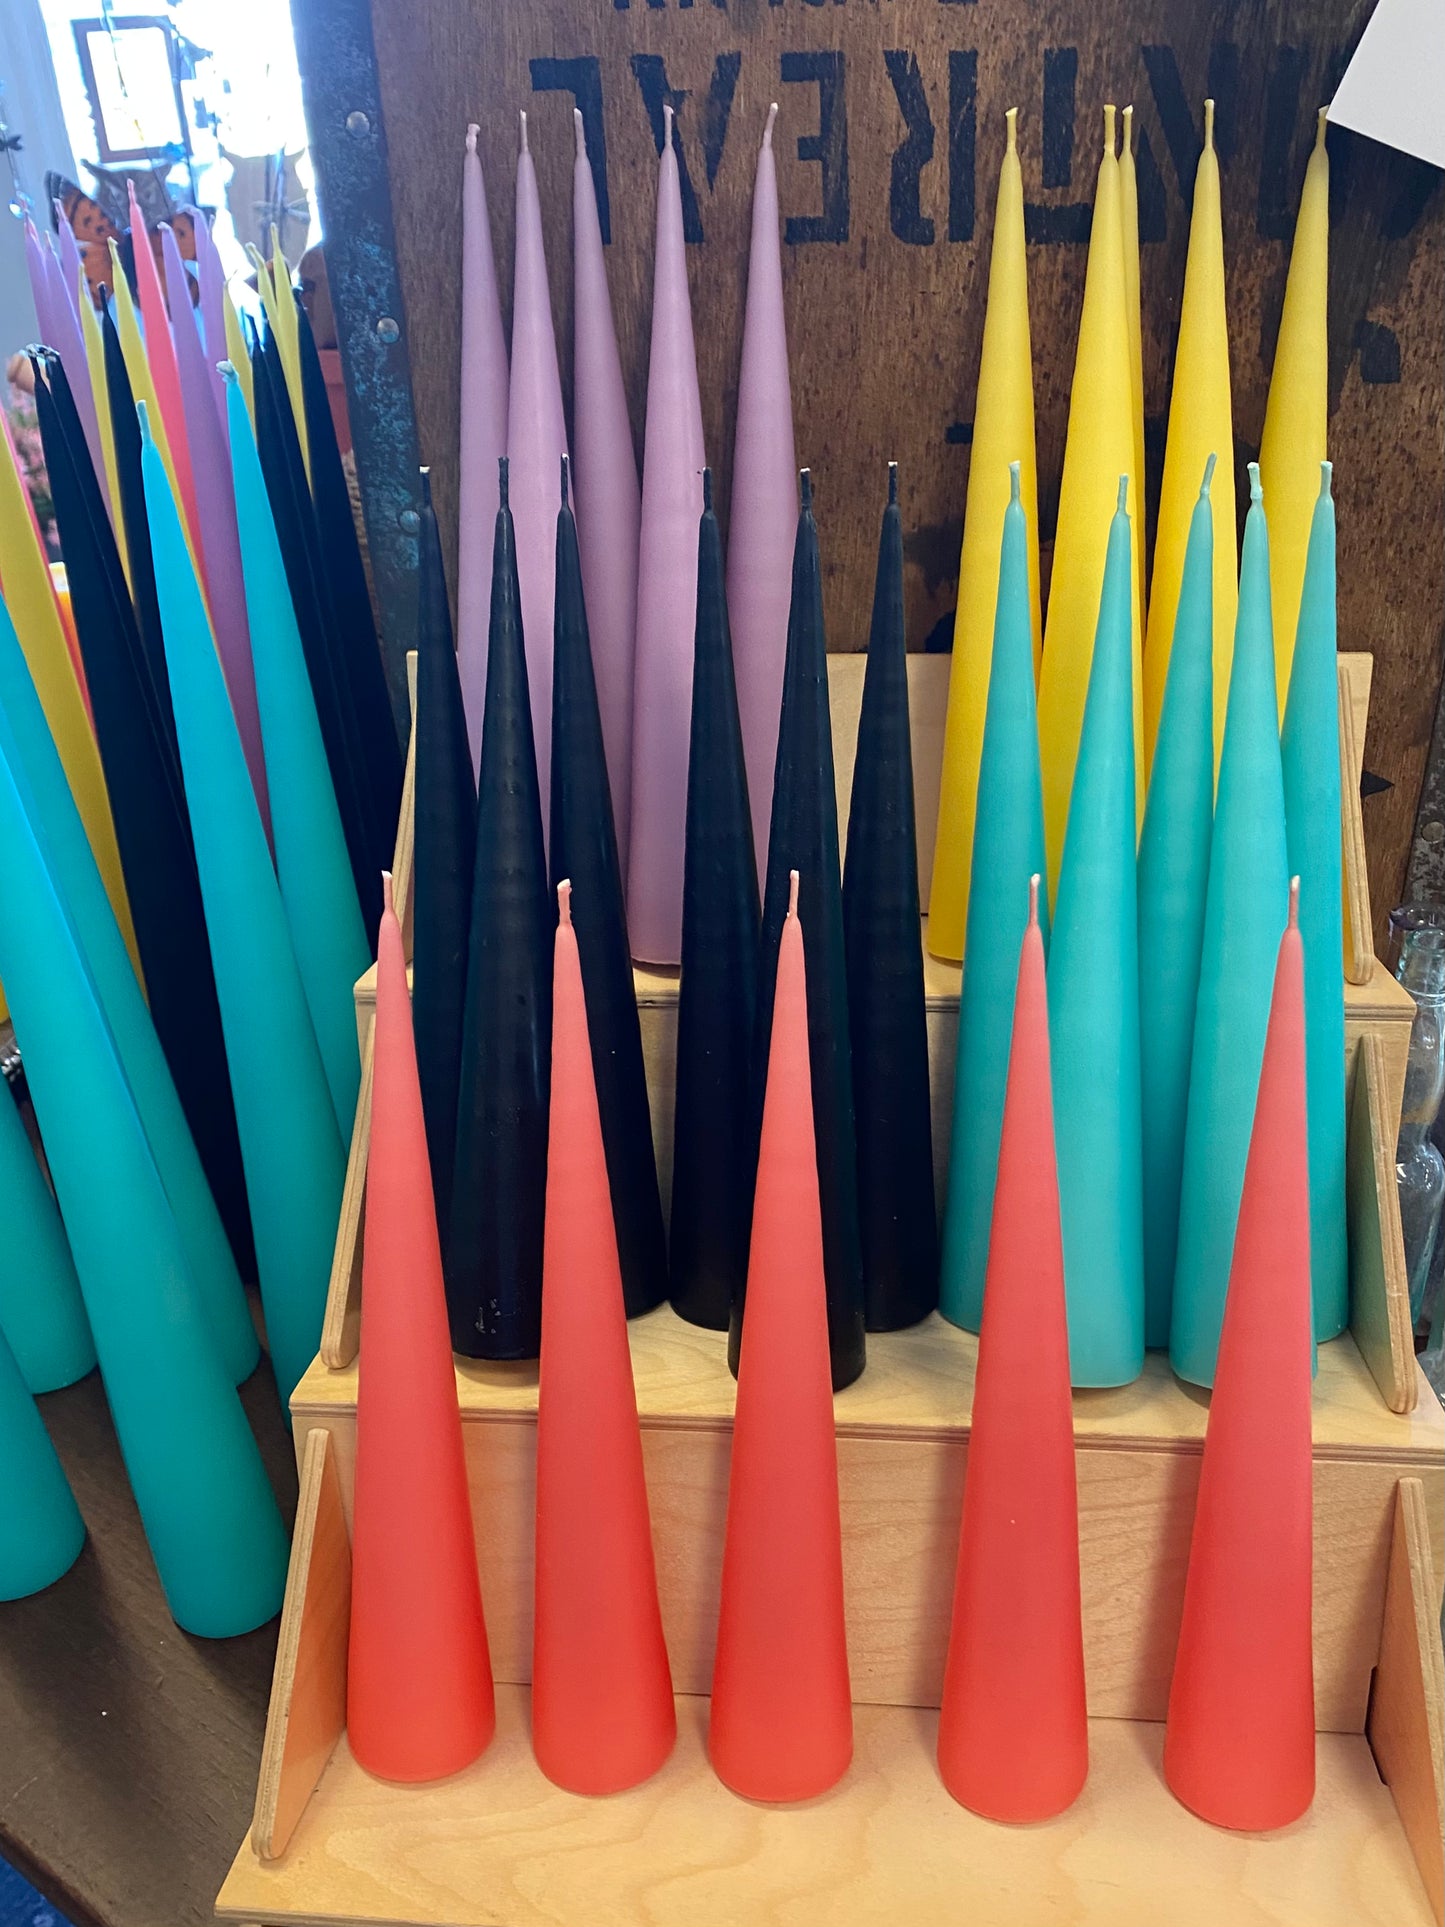 25cm High Quality Cone Candles Coloured By Hand in Denmark